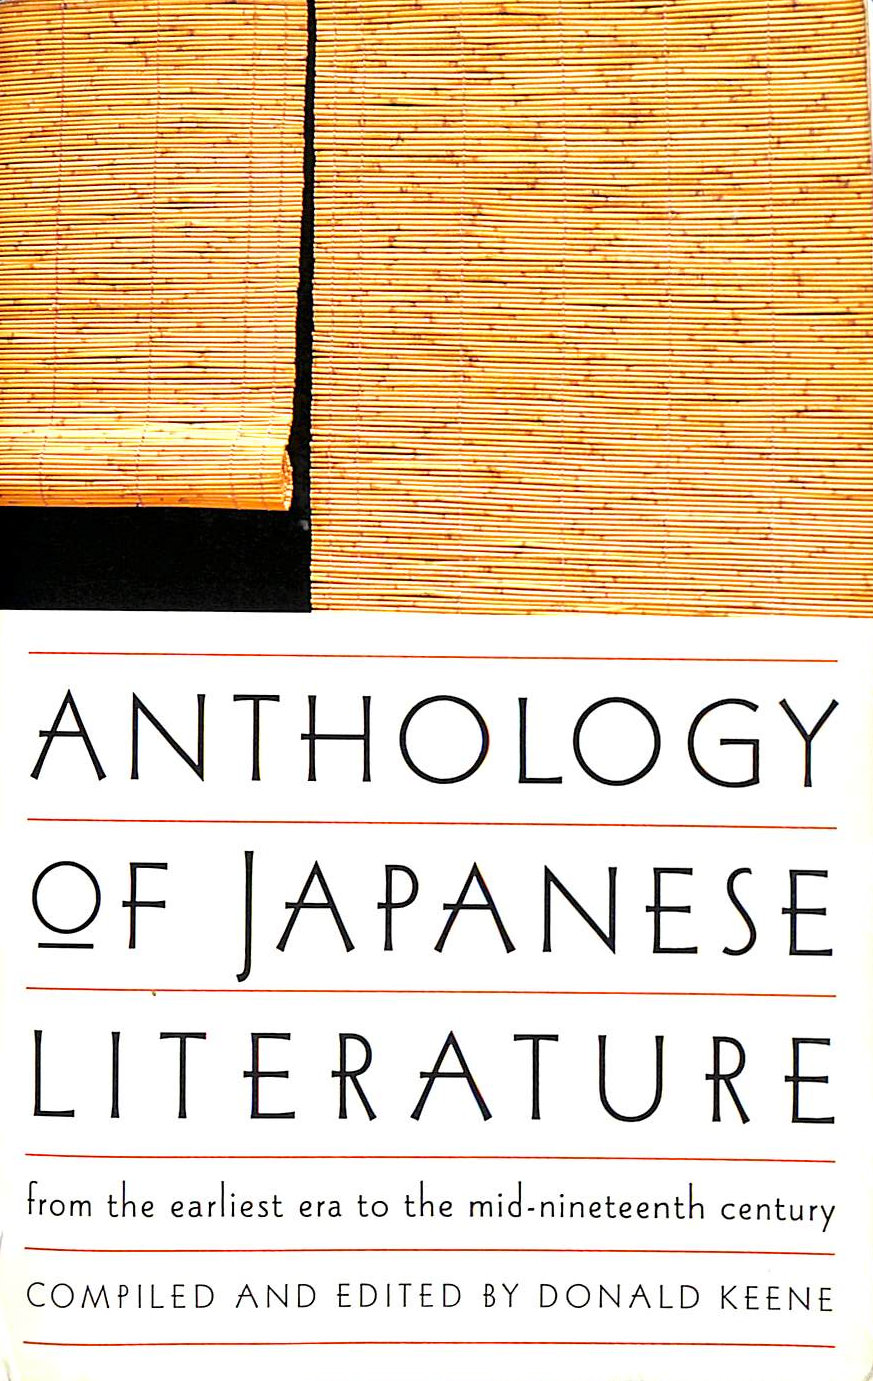 VARIOUS - Anthology of Japanese Literature: From the Earliest Era to the Mid-Nineteenth Century (UNESCO Collection of Representative Works: European)